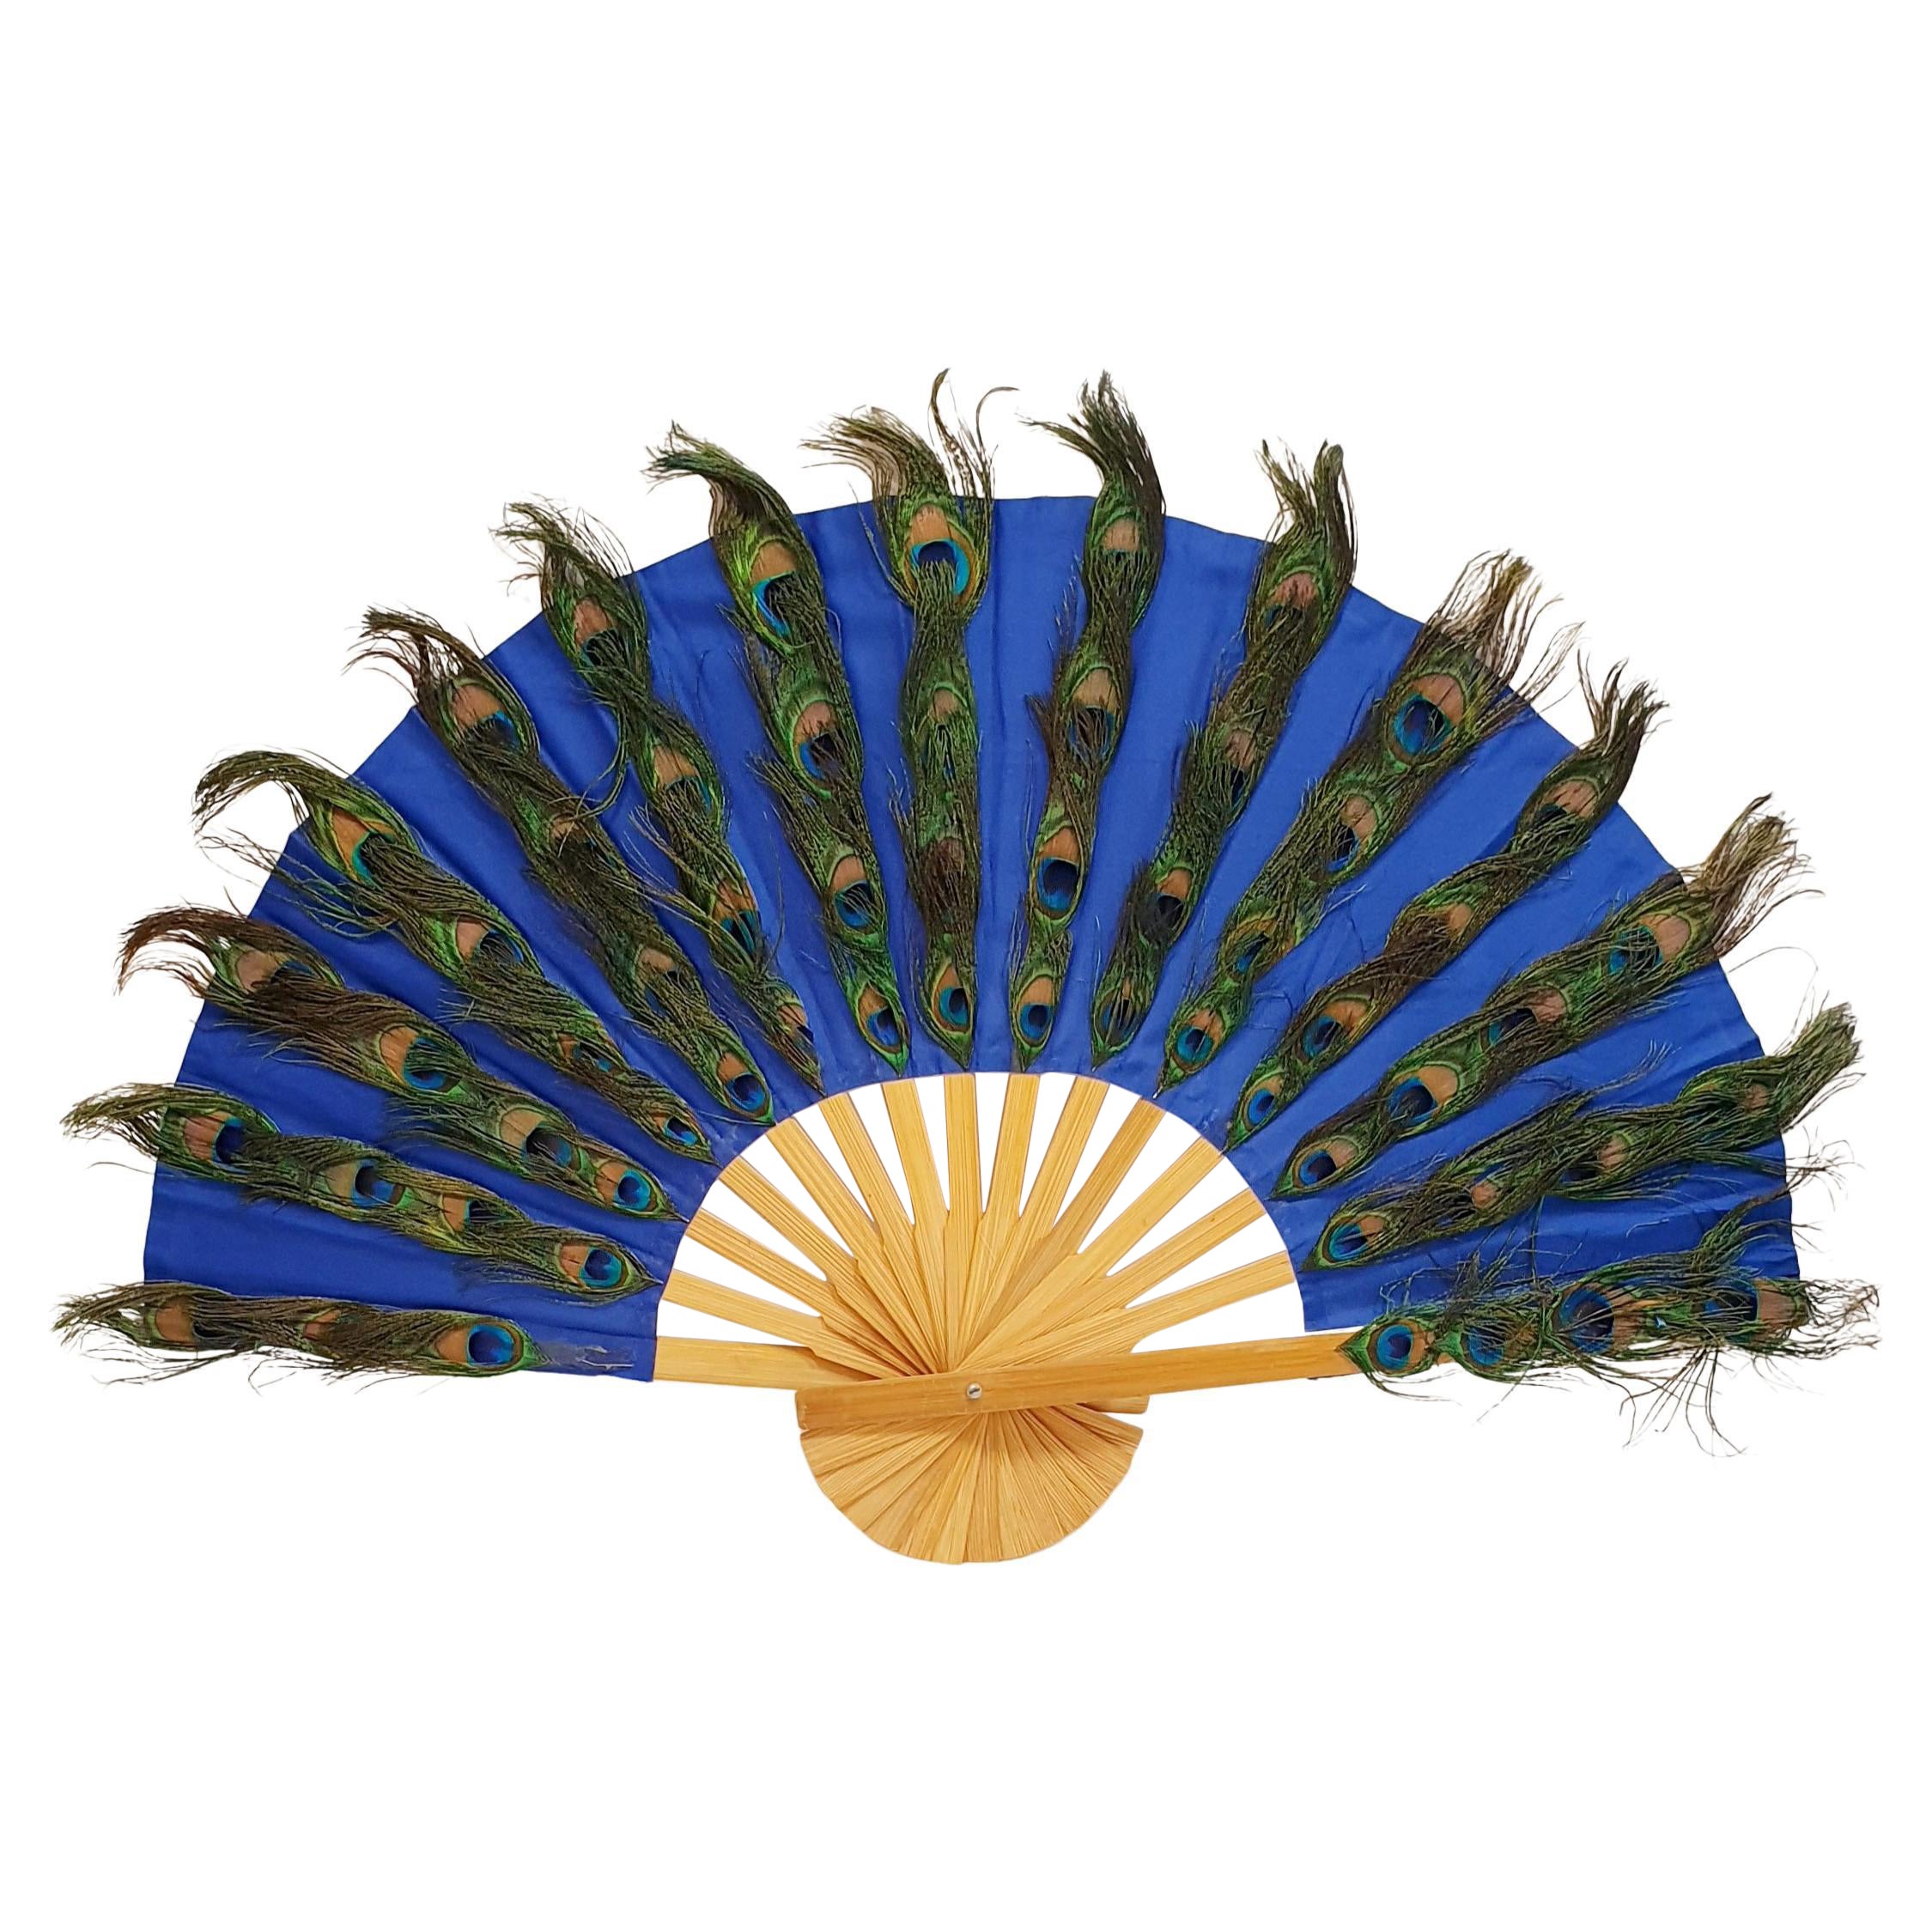  Peacok Feathers Fan in natural barnished pine wood   For Sale